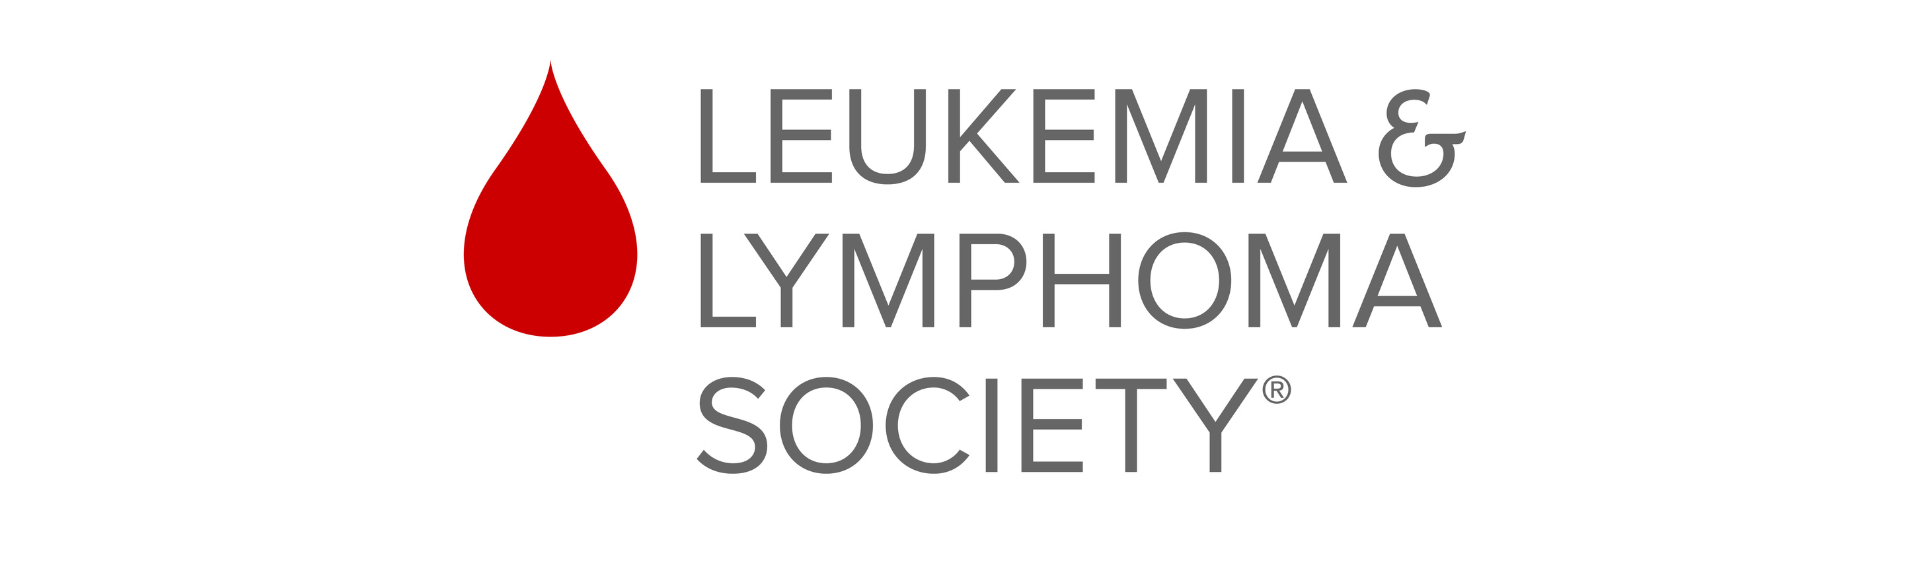 The relationship between the Leukemia & Lymphoma Society and the CU Cancer Center goes back decades. 